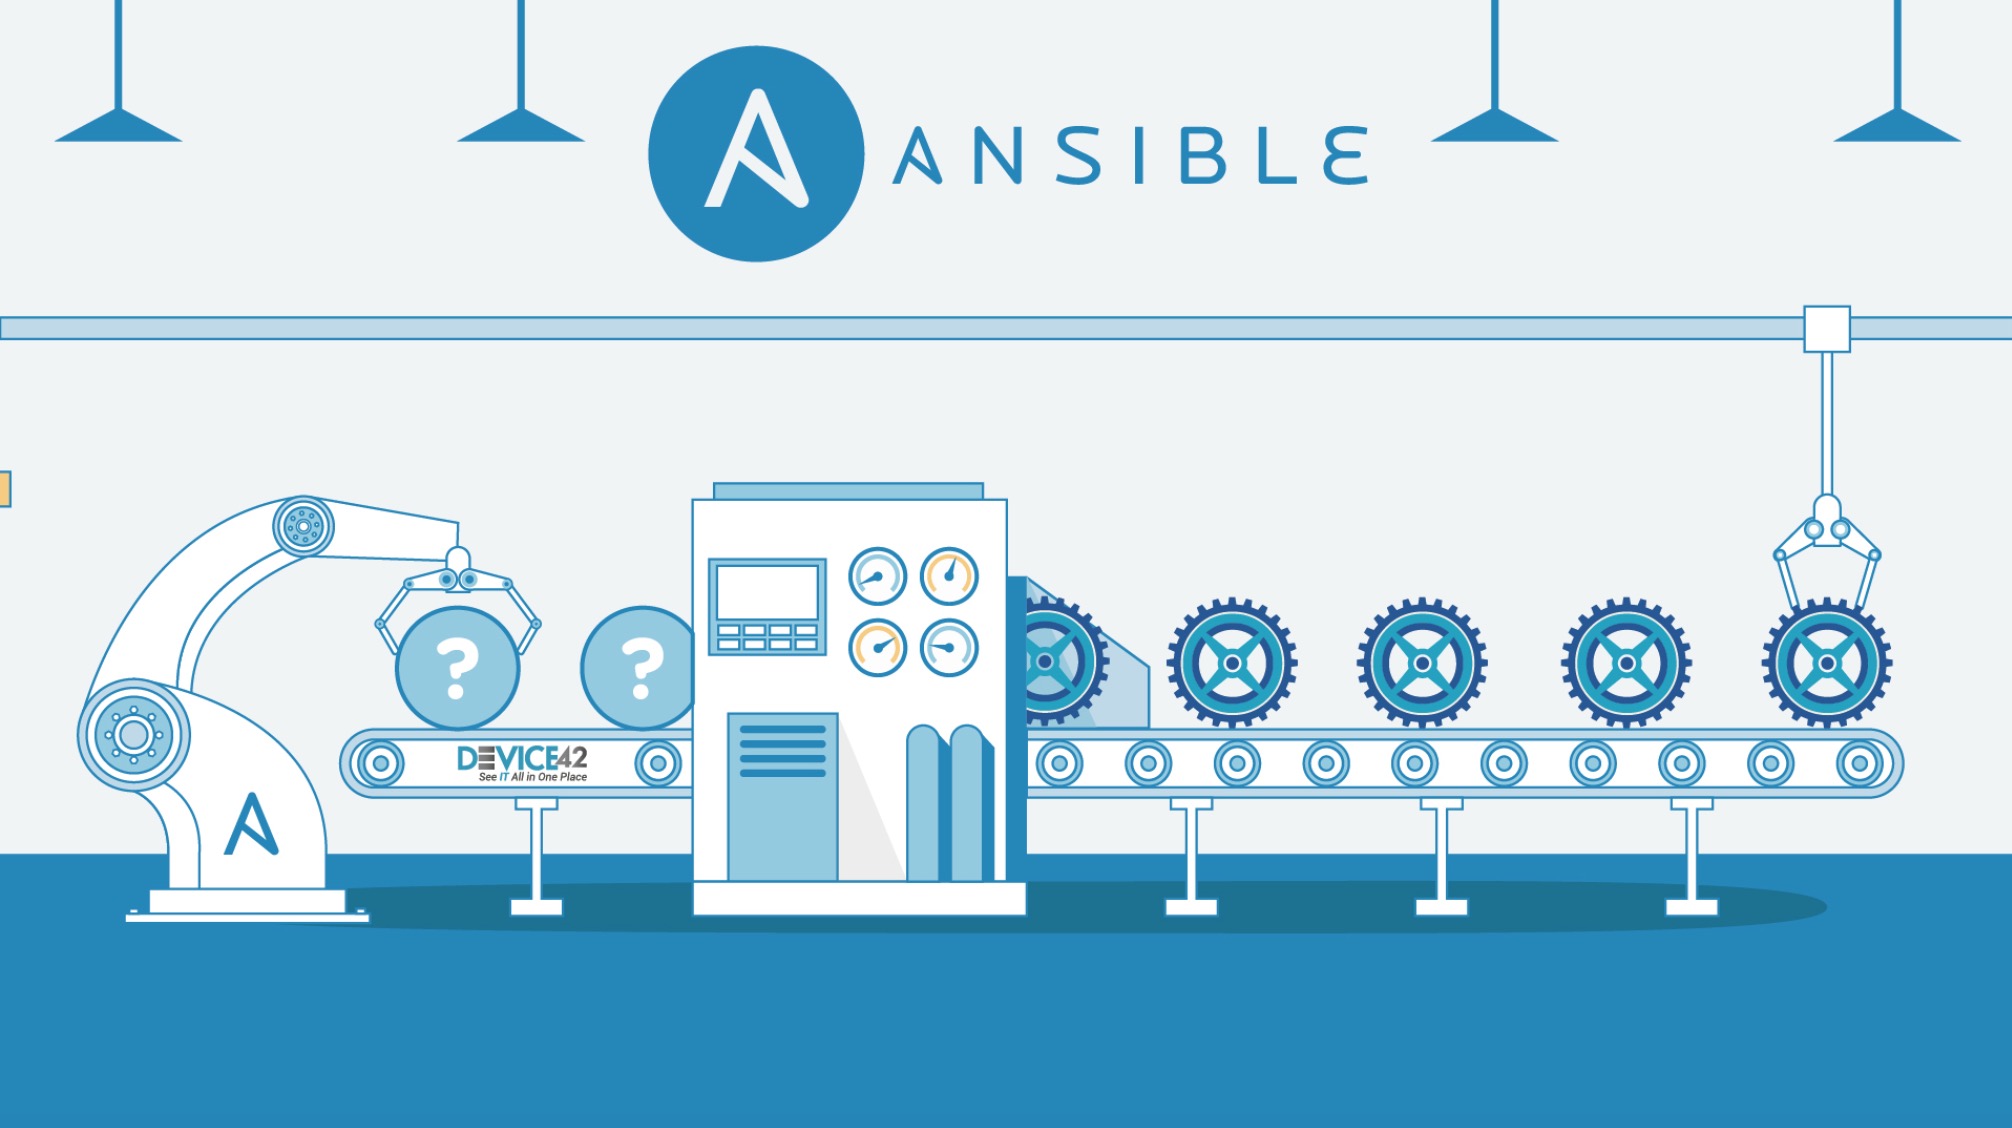 Ansible Automation powered by Device42